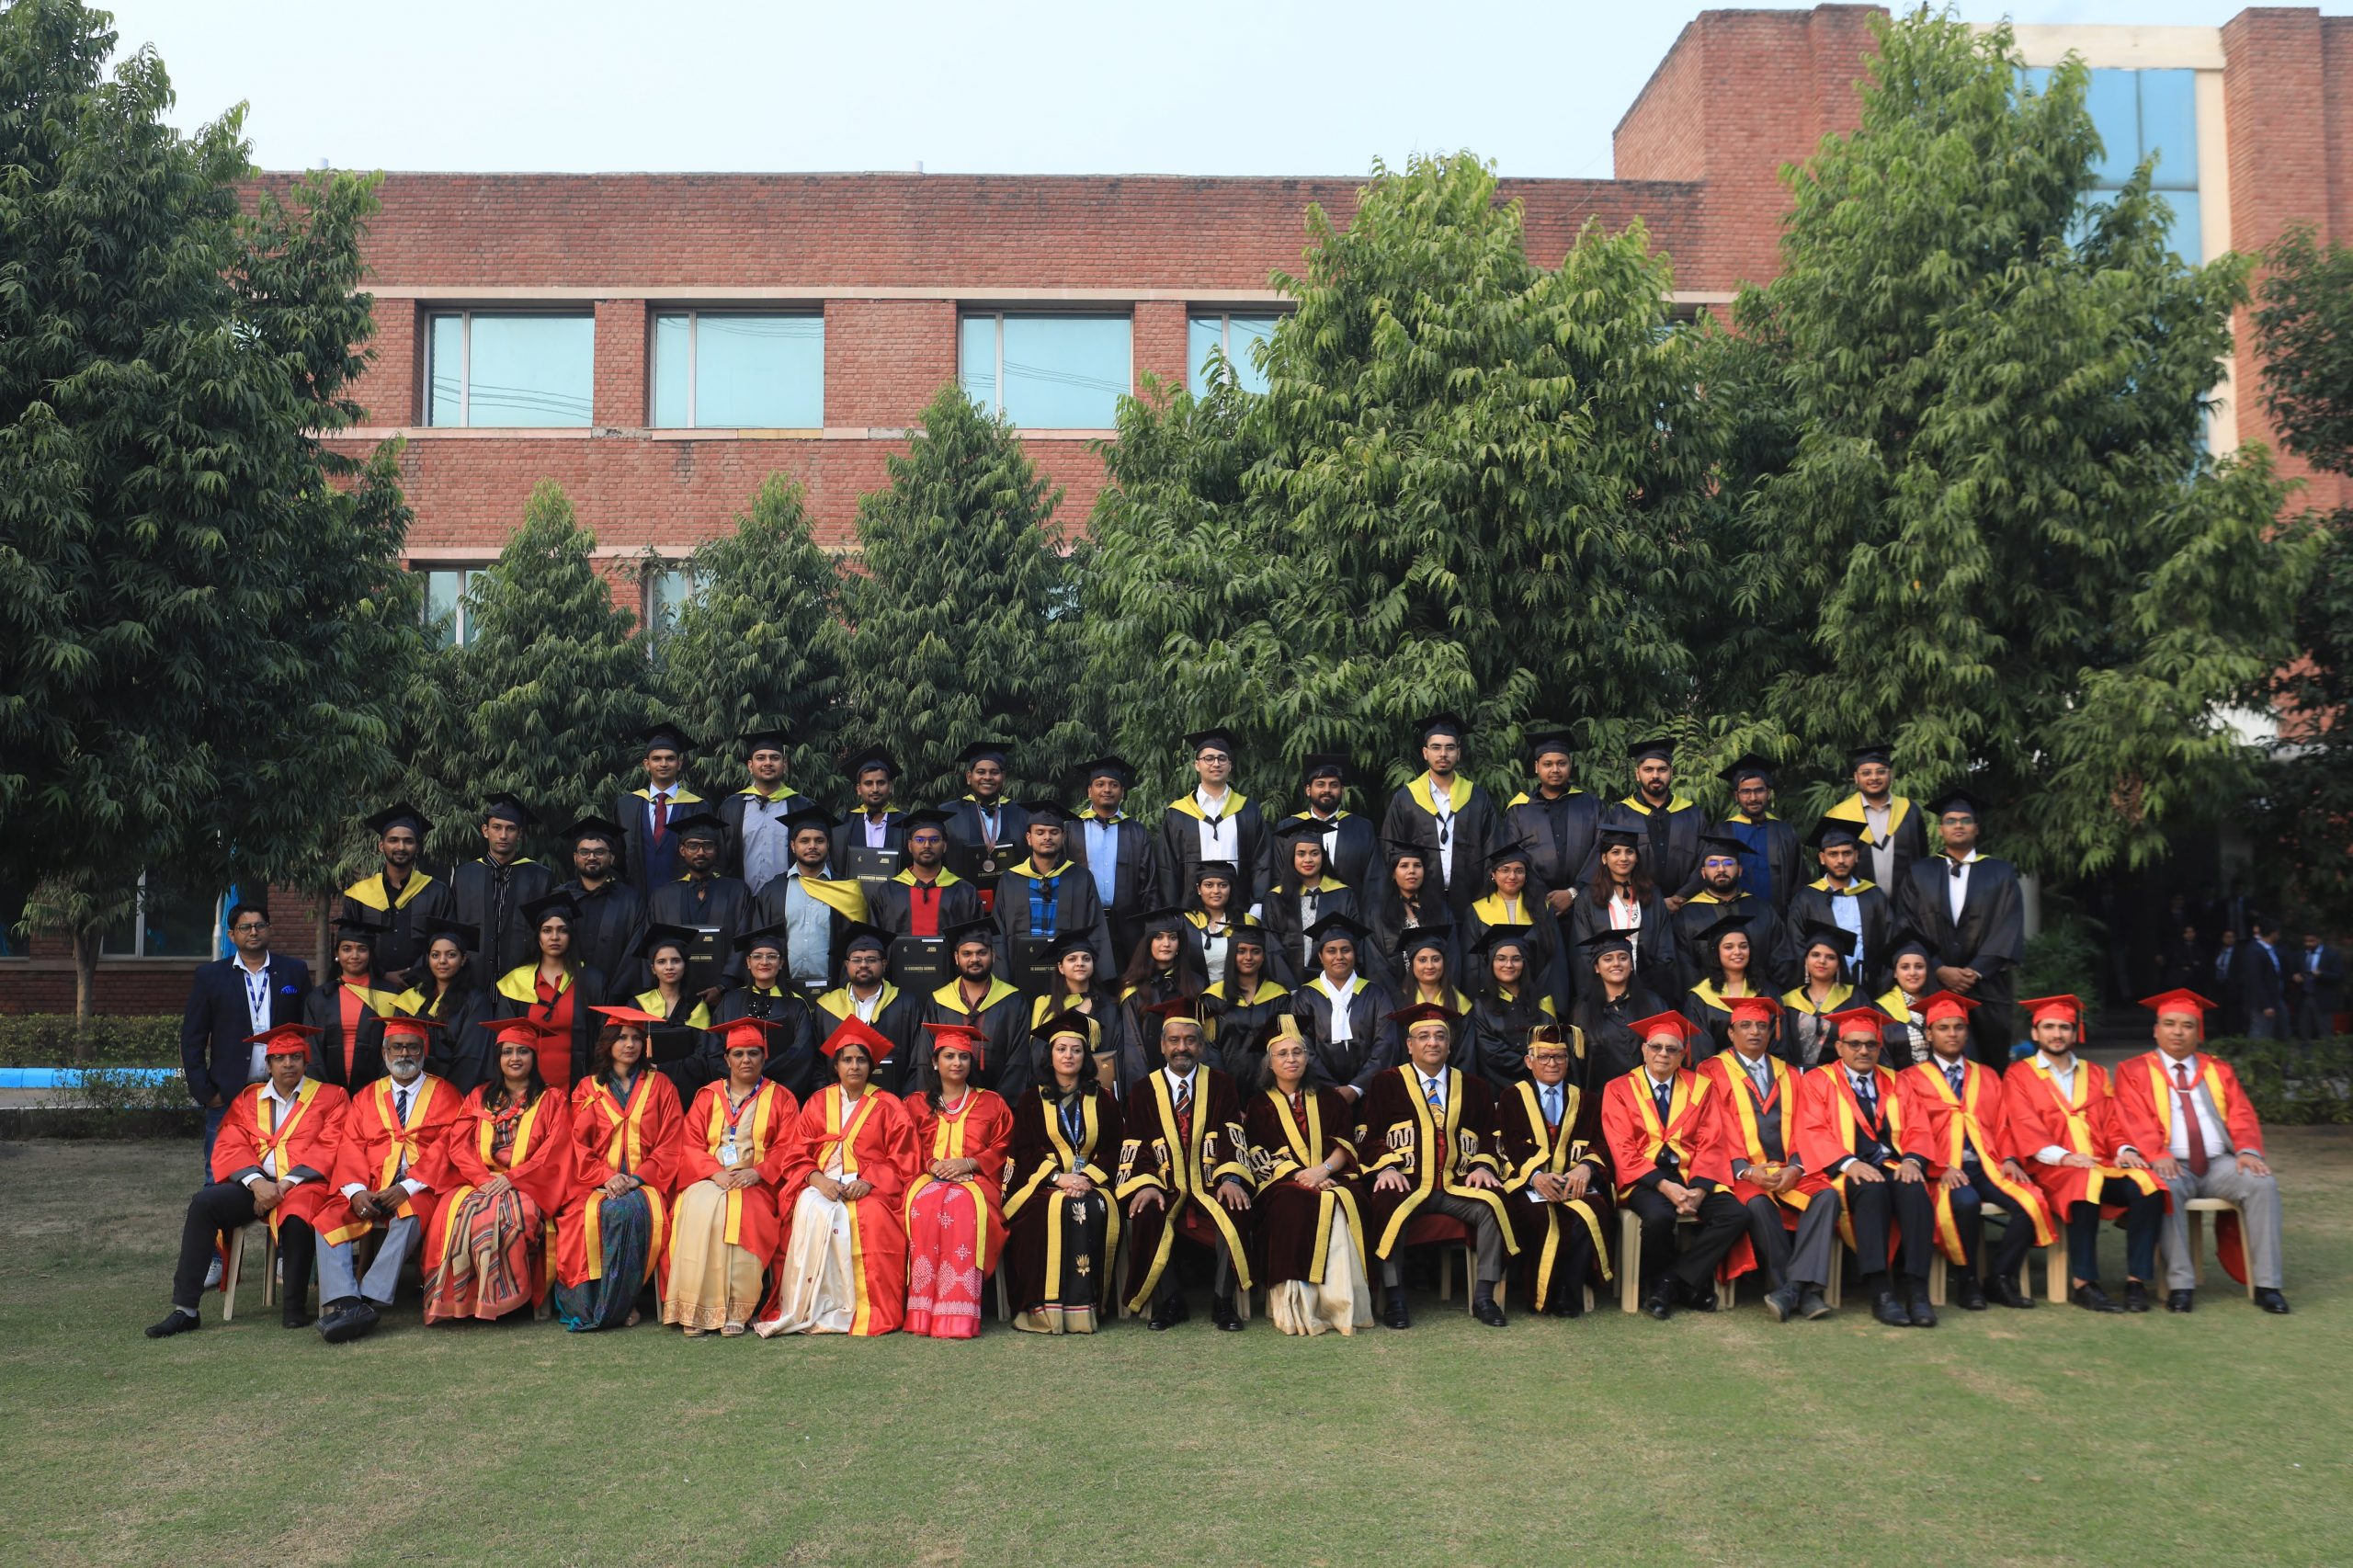 JK Business School Hosts 16th Convocation Ceremony: A Celebration of Leadership and Academic Excellence